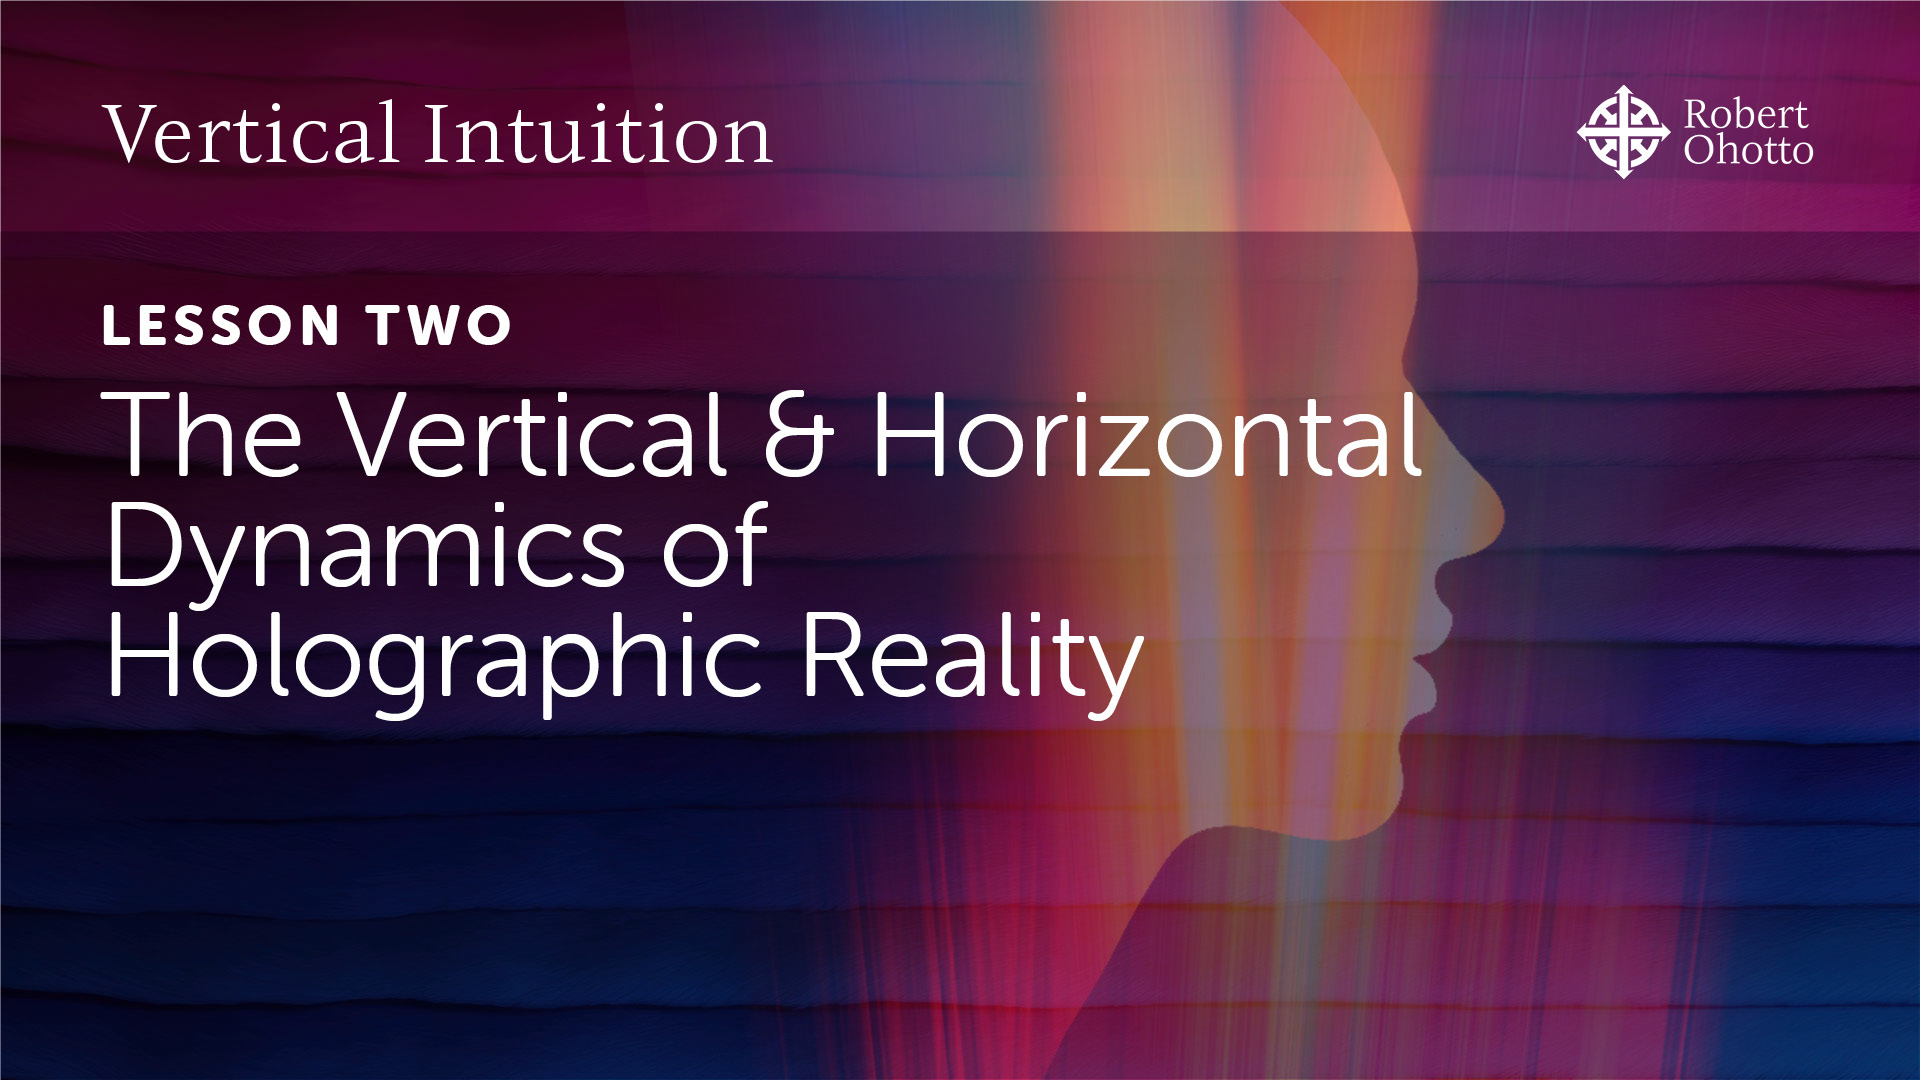 Lesson Two: The Vertical & Horizontal Dynamics of our Holographic Reality